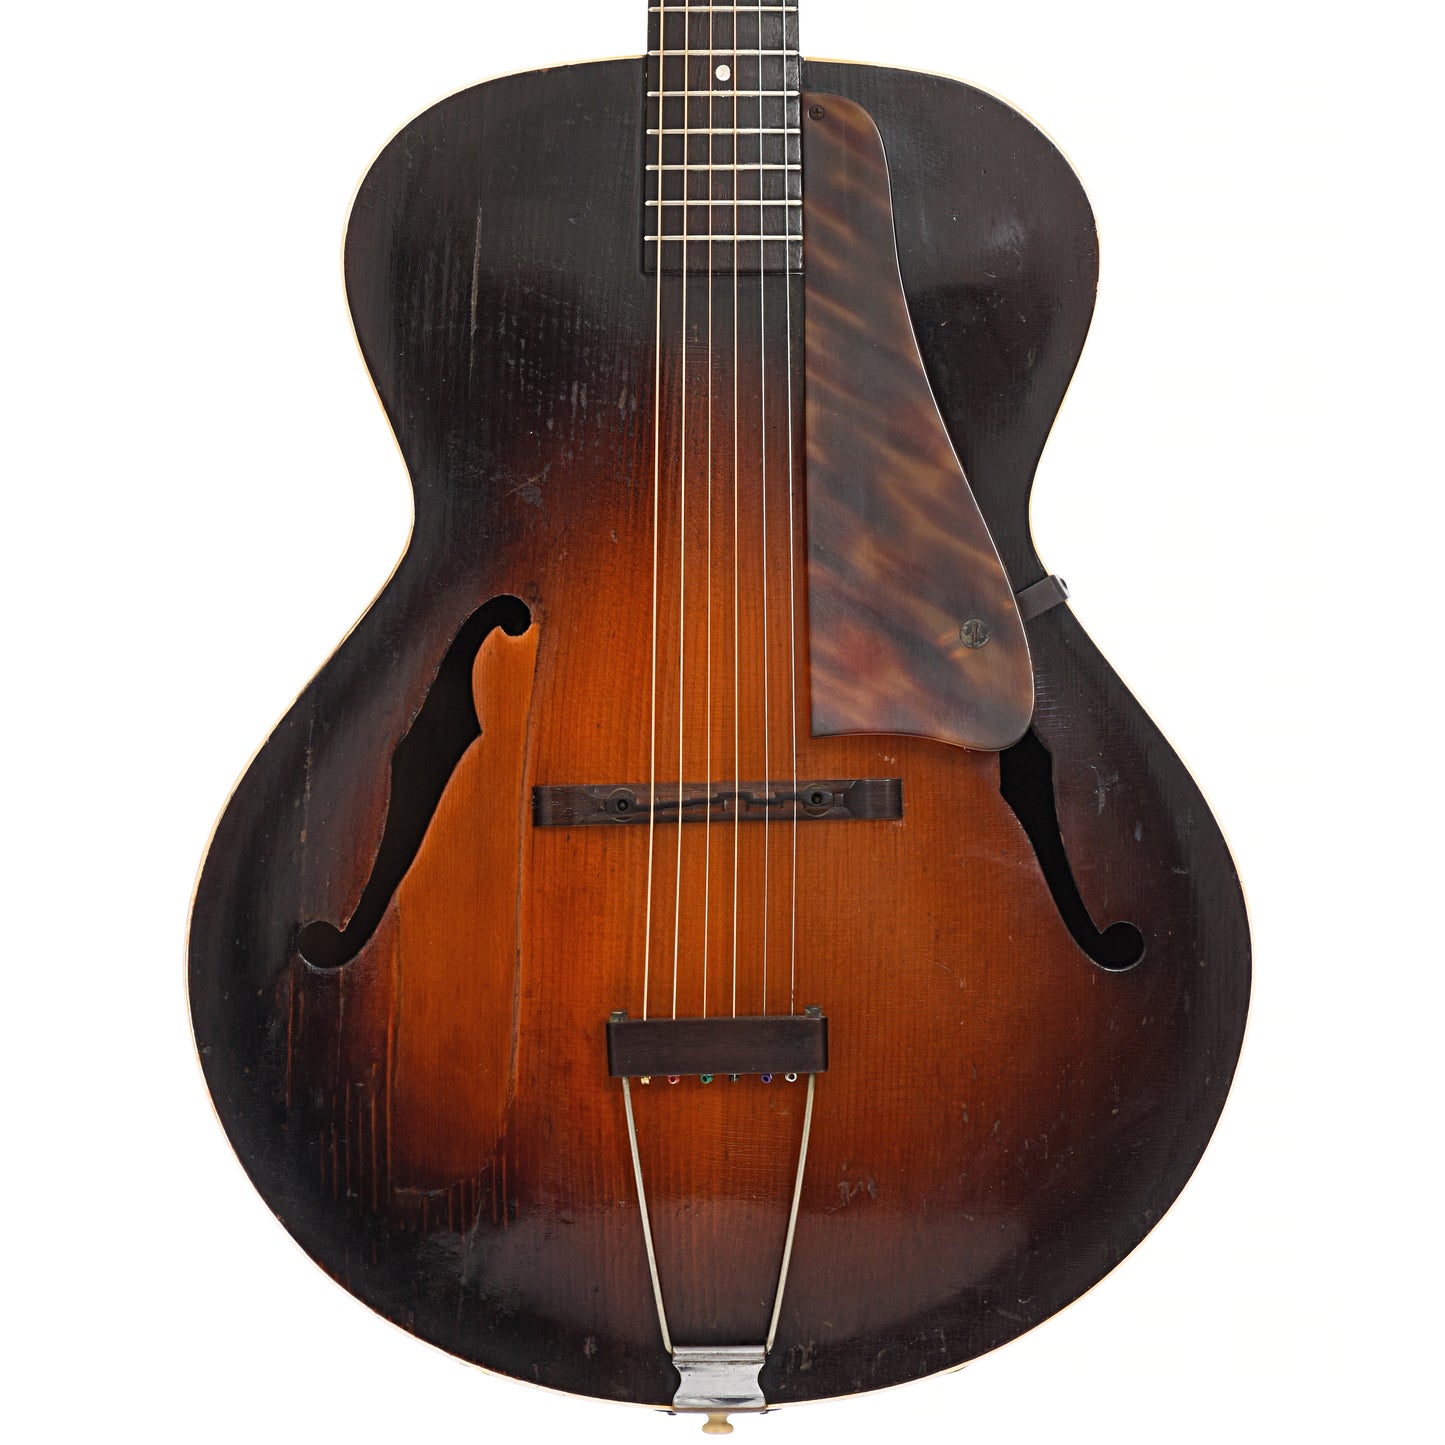 Gibson L-50 Archtop Hollowbody Guitar (c.1941)